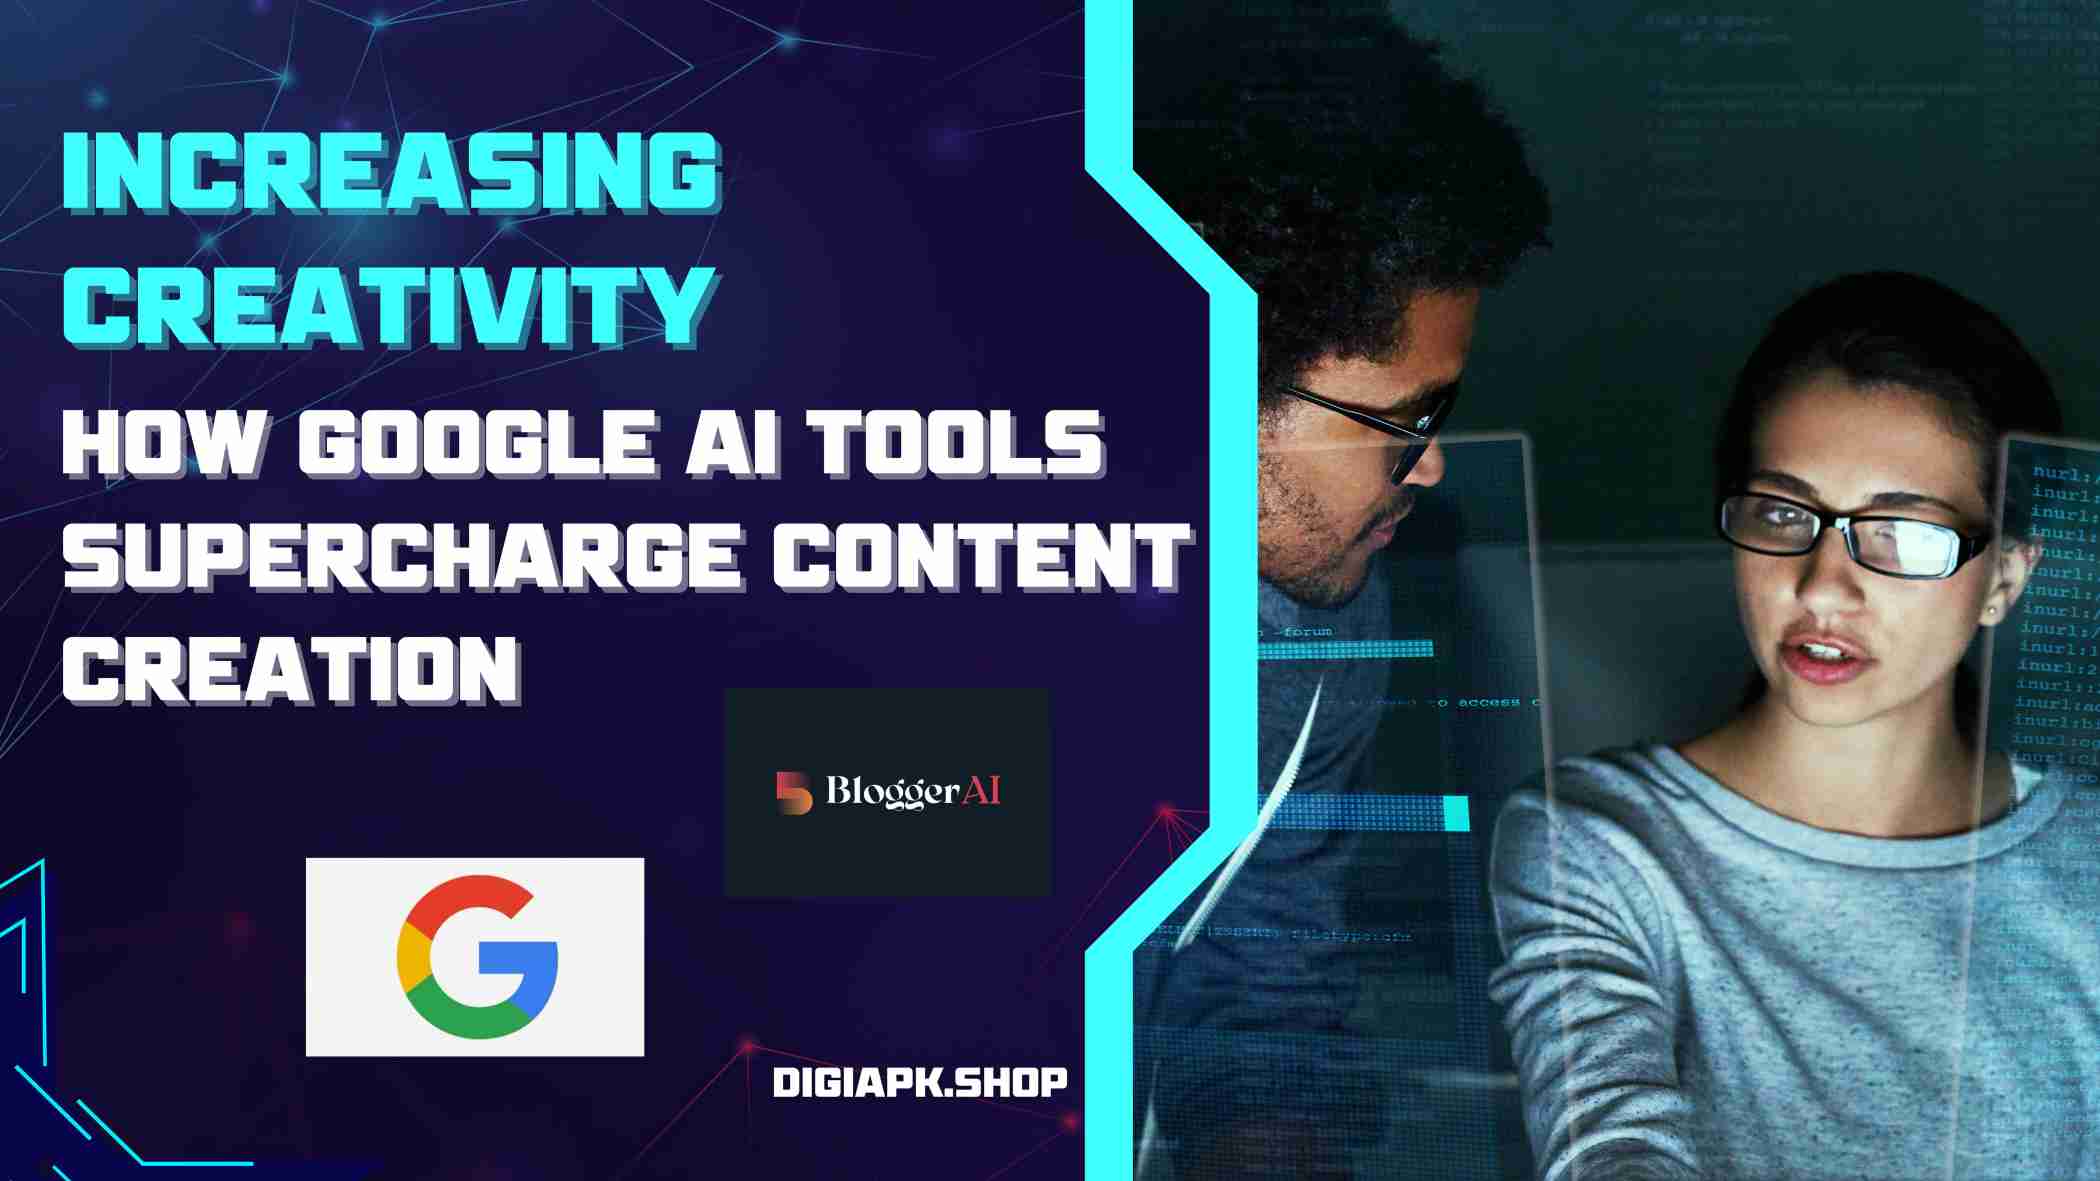 Increasing Creativity: How Google AI Tools Supercharge Content Creation